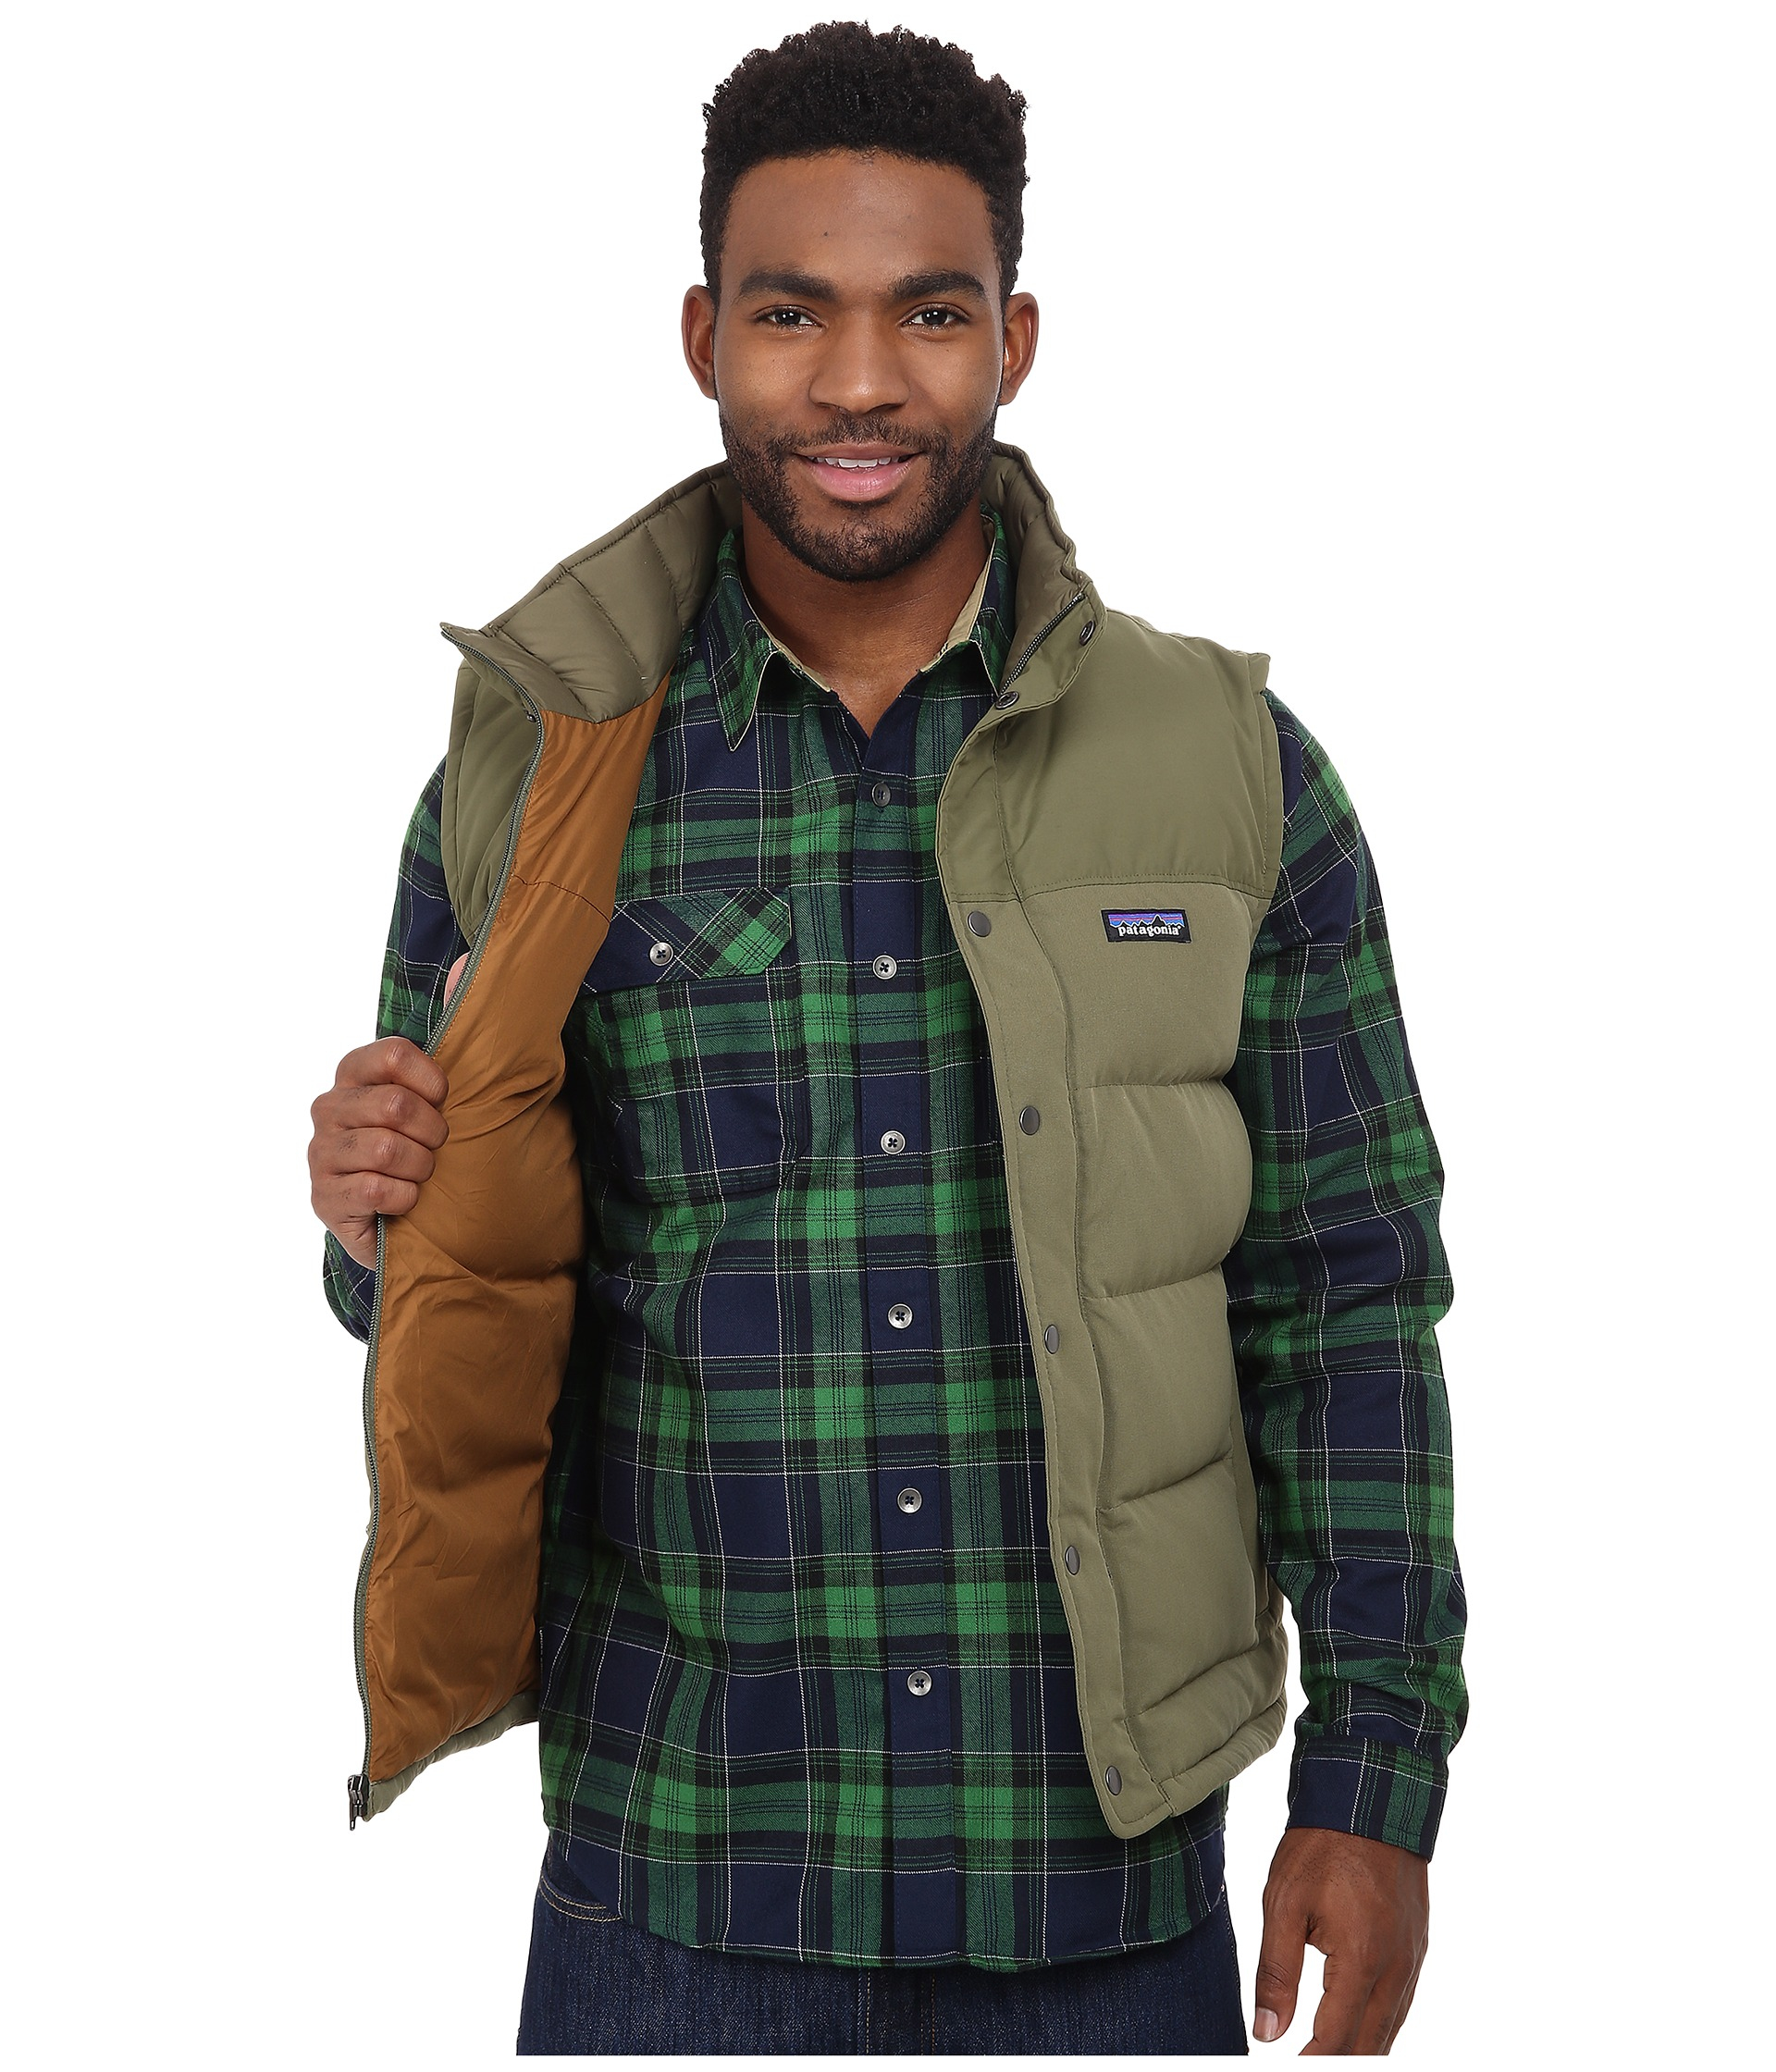 Patagonia Bivy Down Vest in Green for Men - Lyst